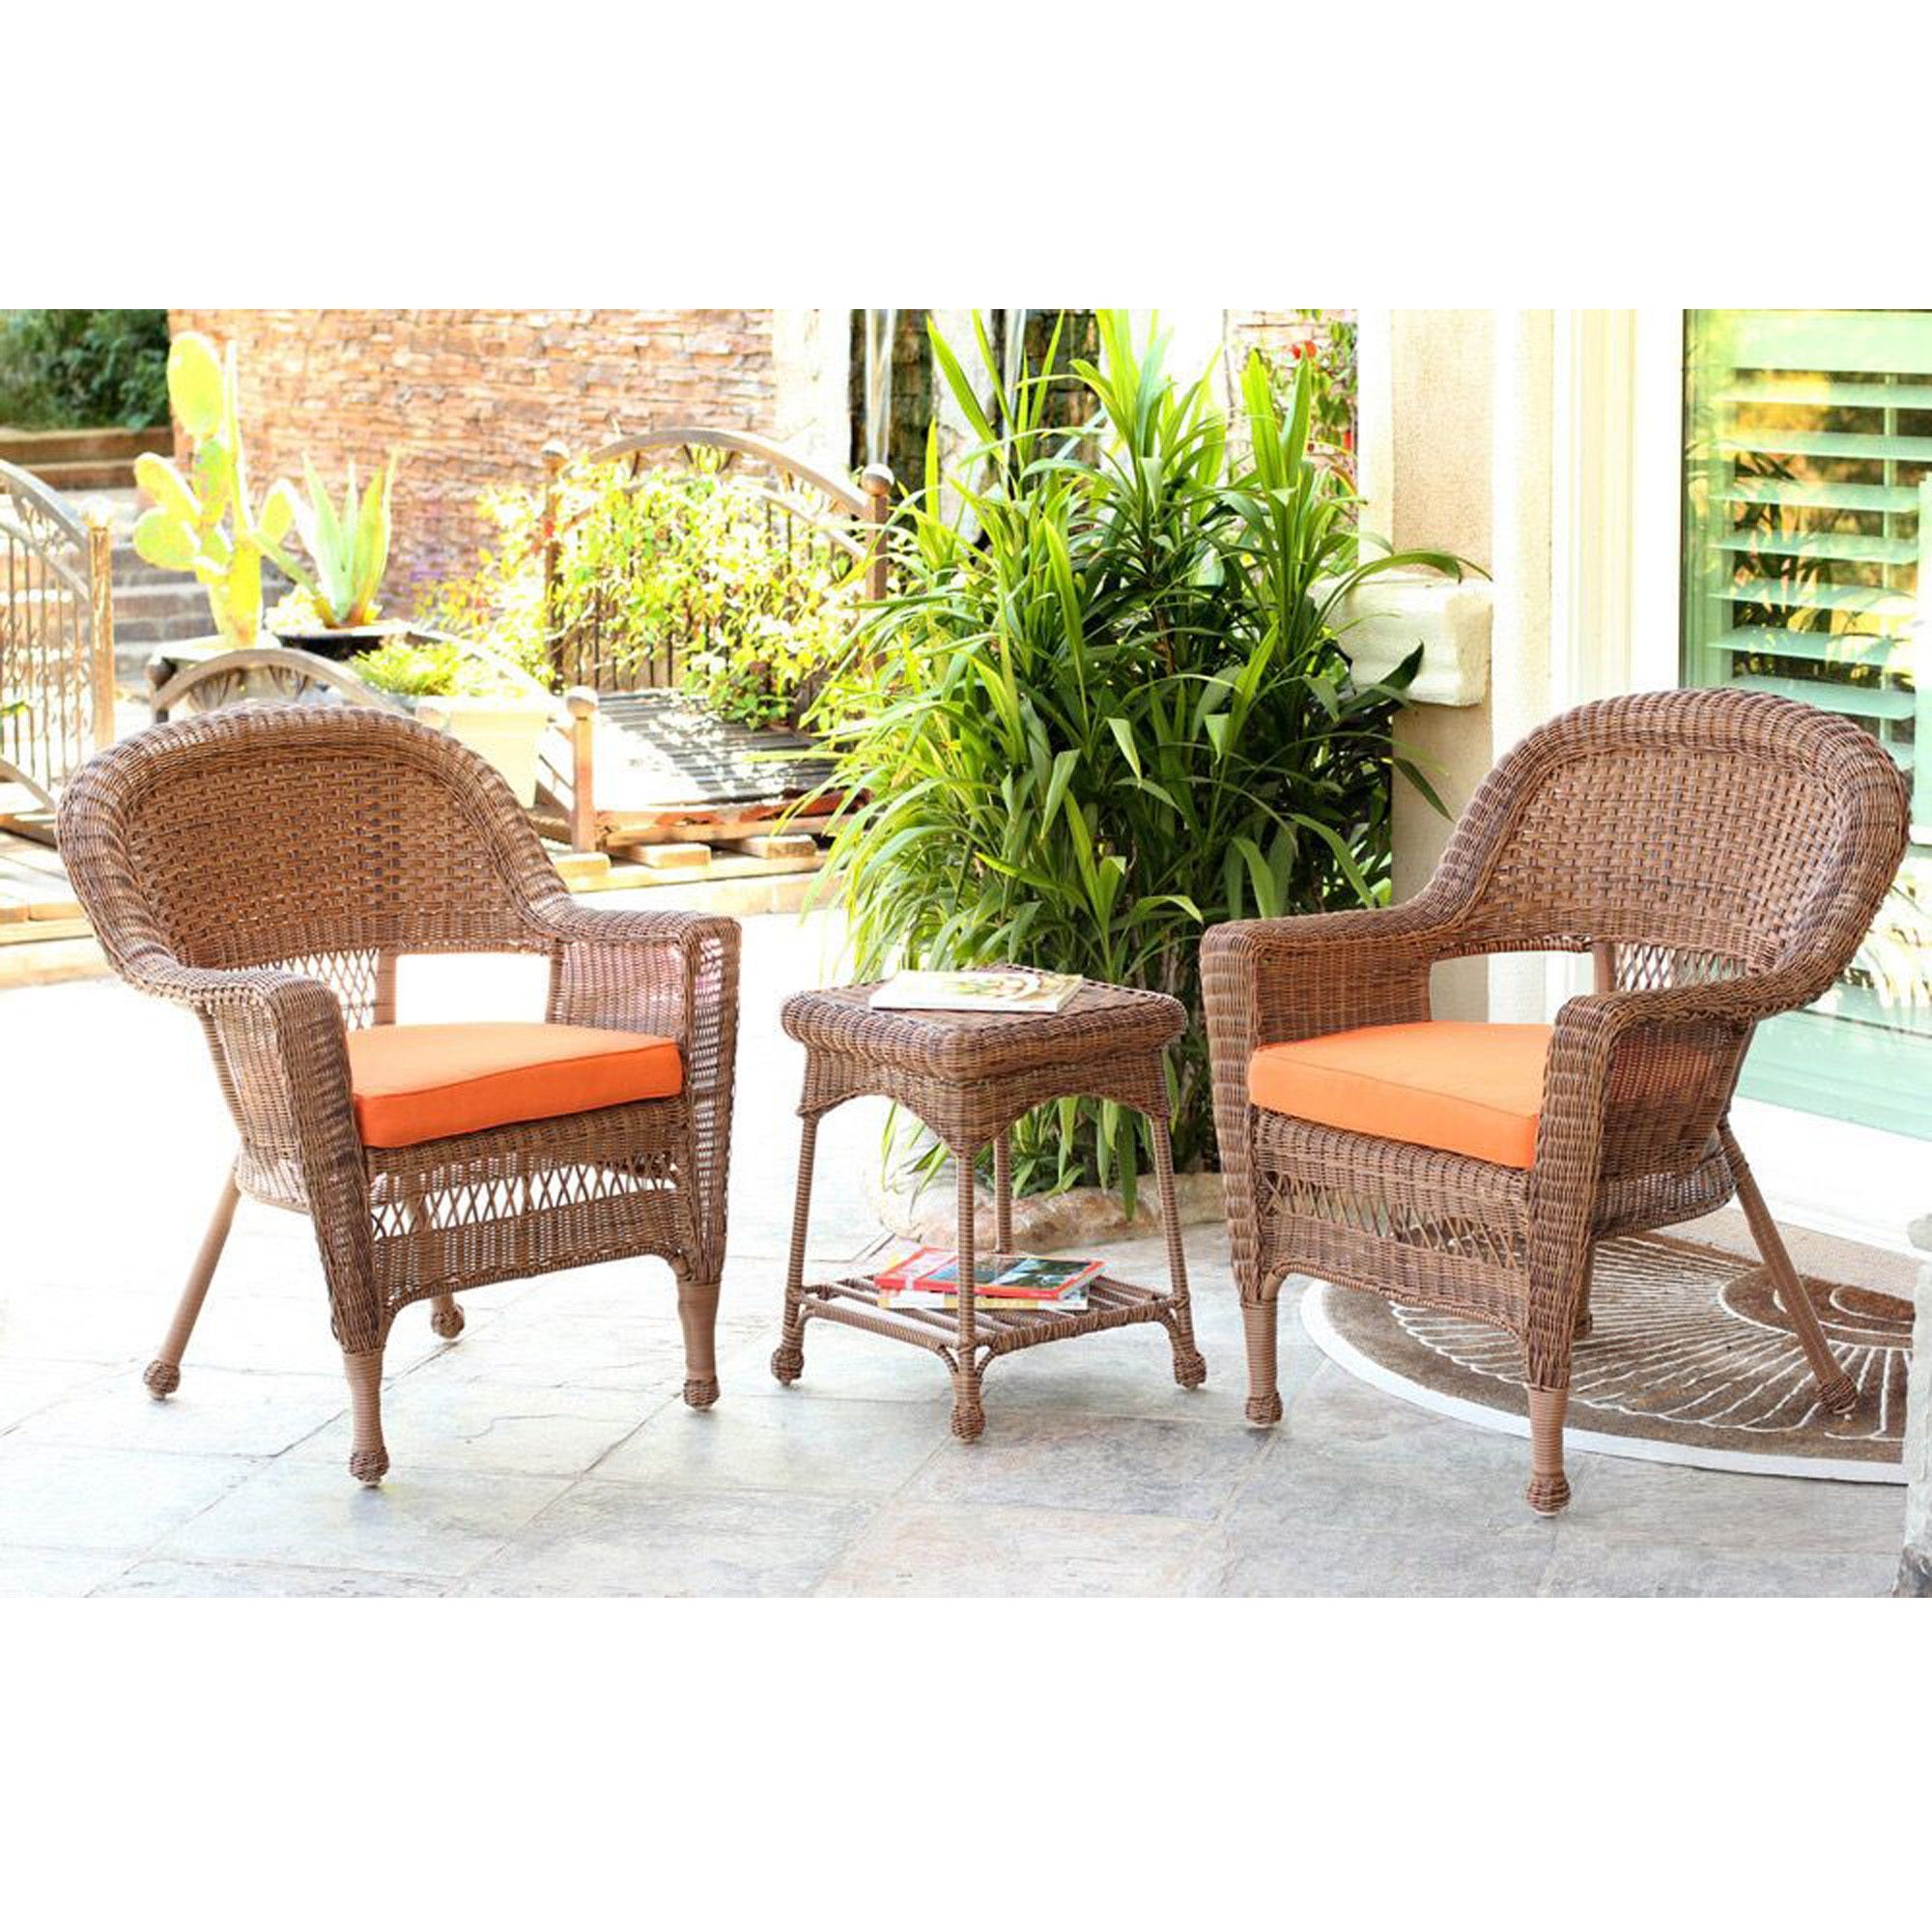 Set Of 3 Honey Brown Resin Wicker Patio Chairs And End Table With In Outdoor Wicker Orange Cushion Patio Sets (View 4 of 15)